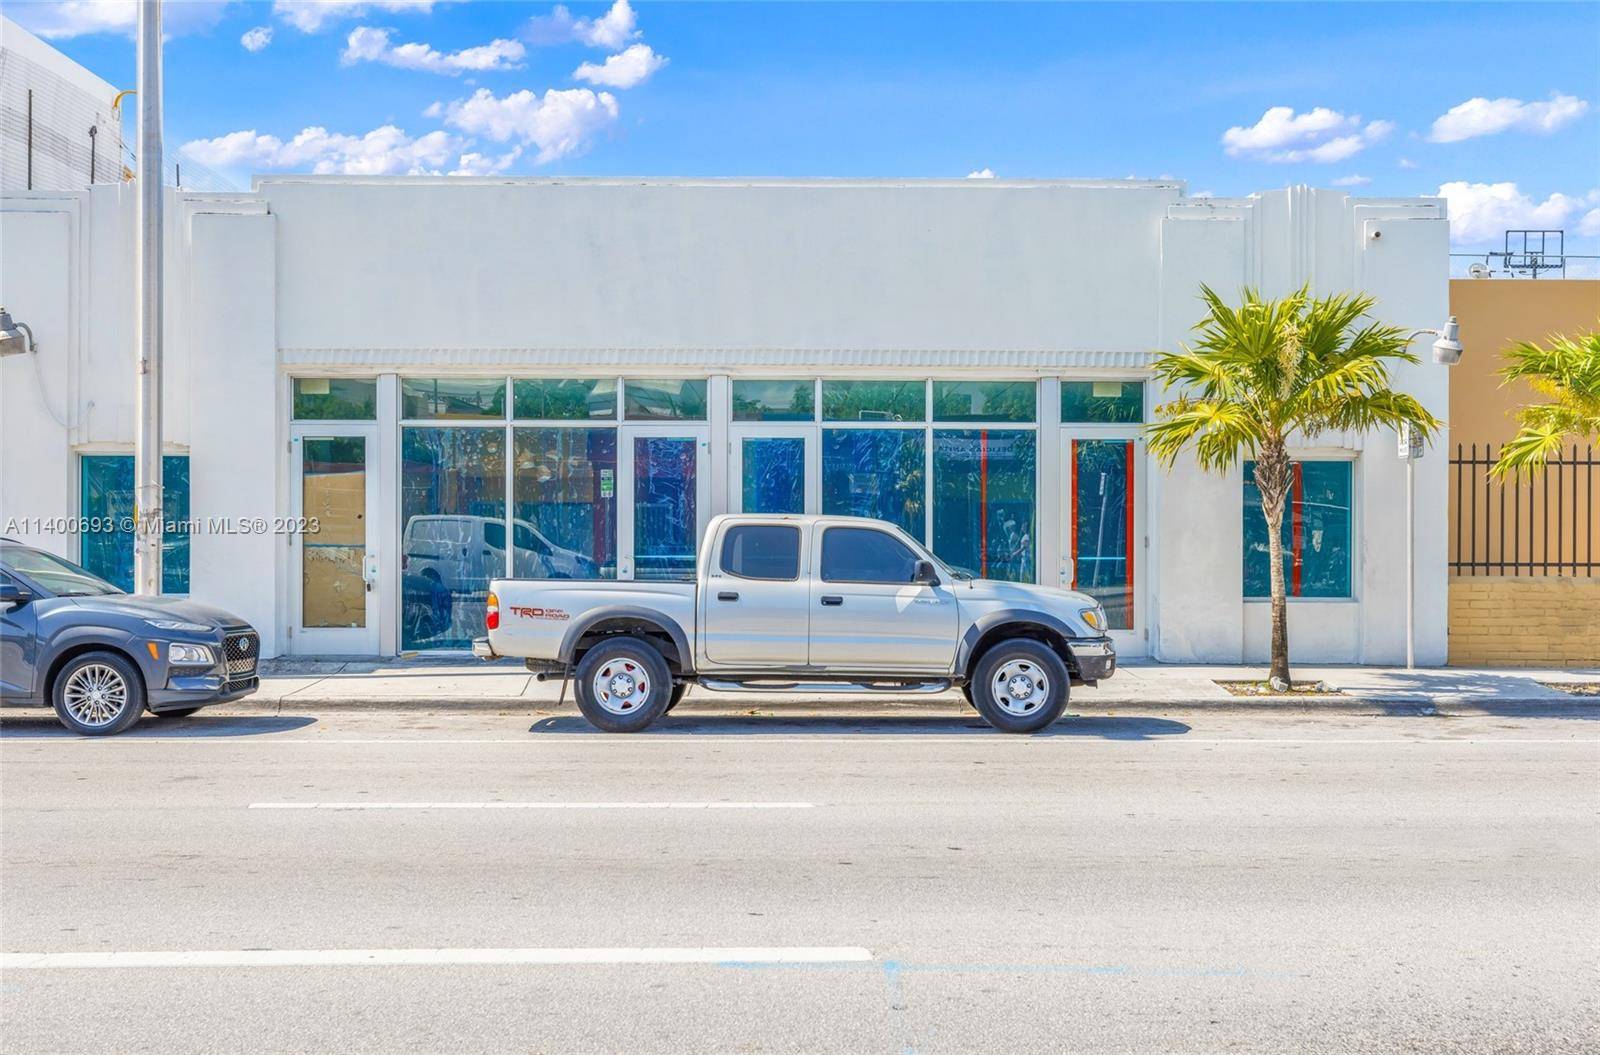 Open your business on Miami s vibrant West Flagler St.